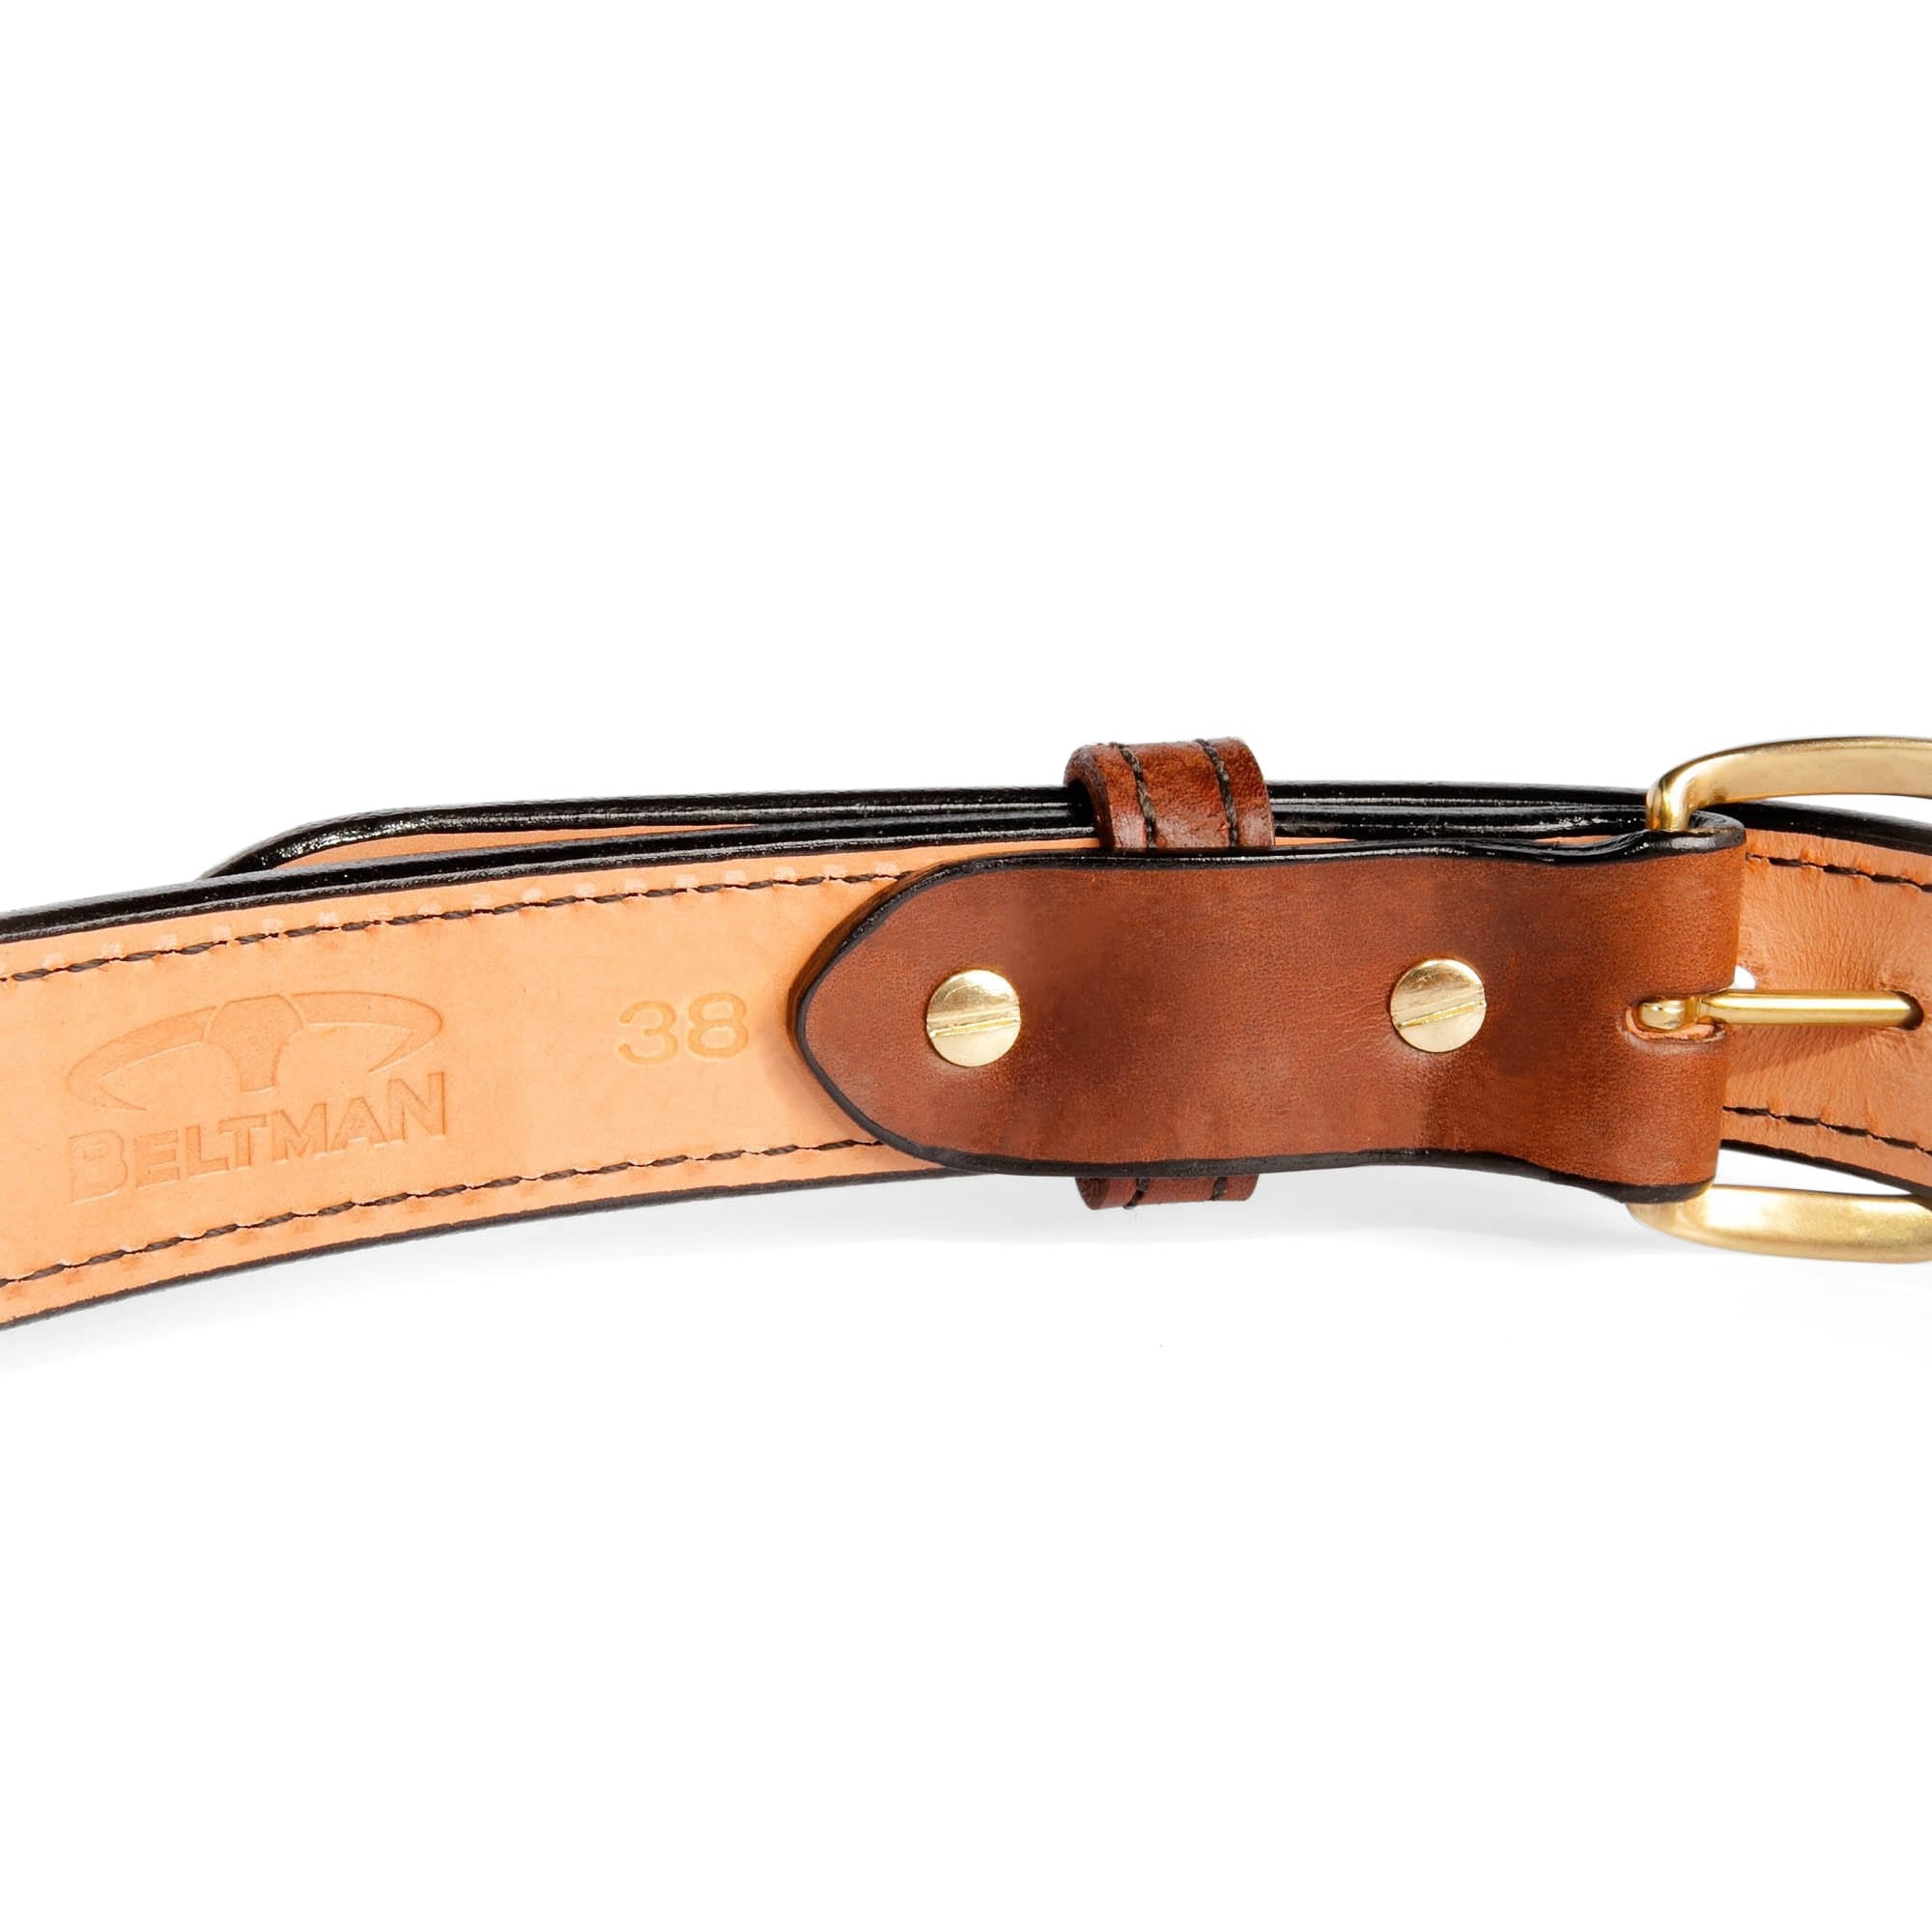 3-Inch Wide Brown Leather Guitar Strap with Clipped Corner Buckle